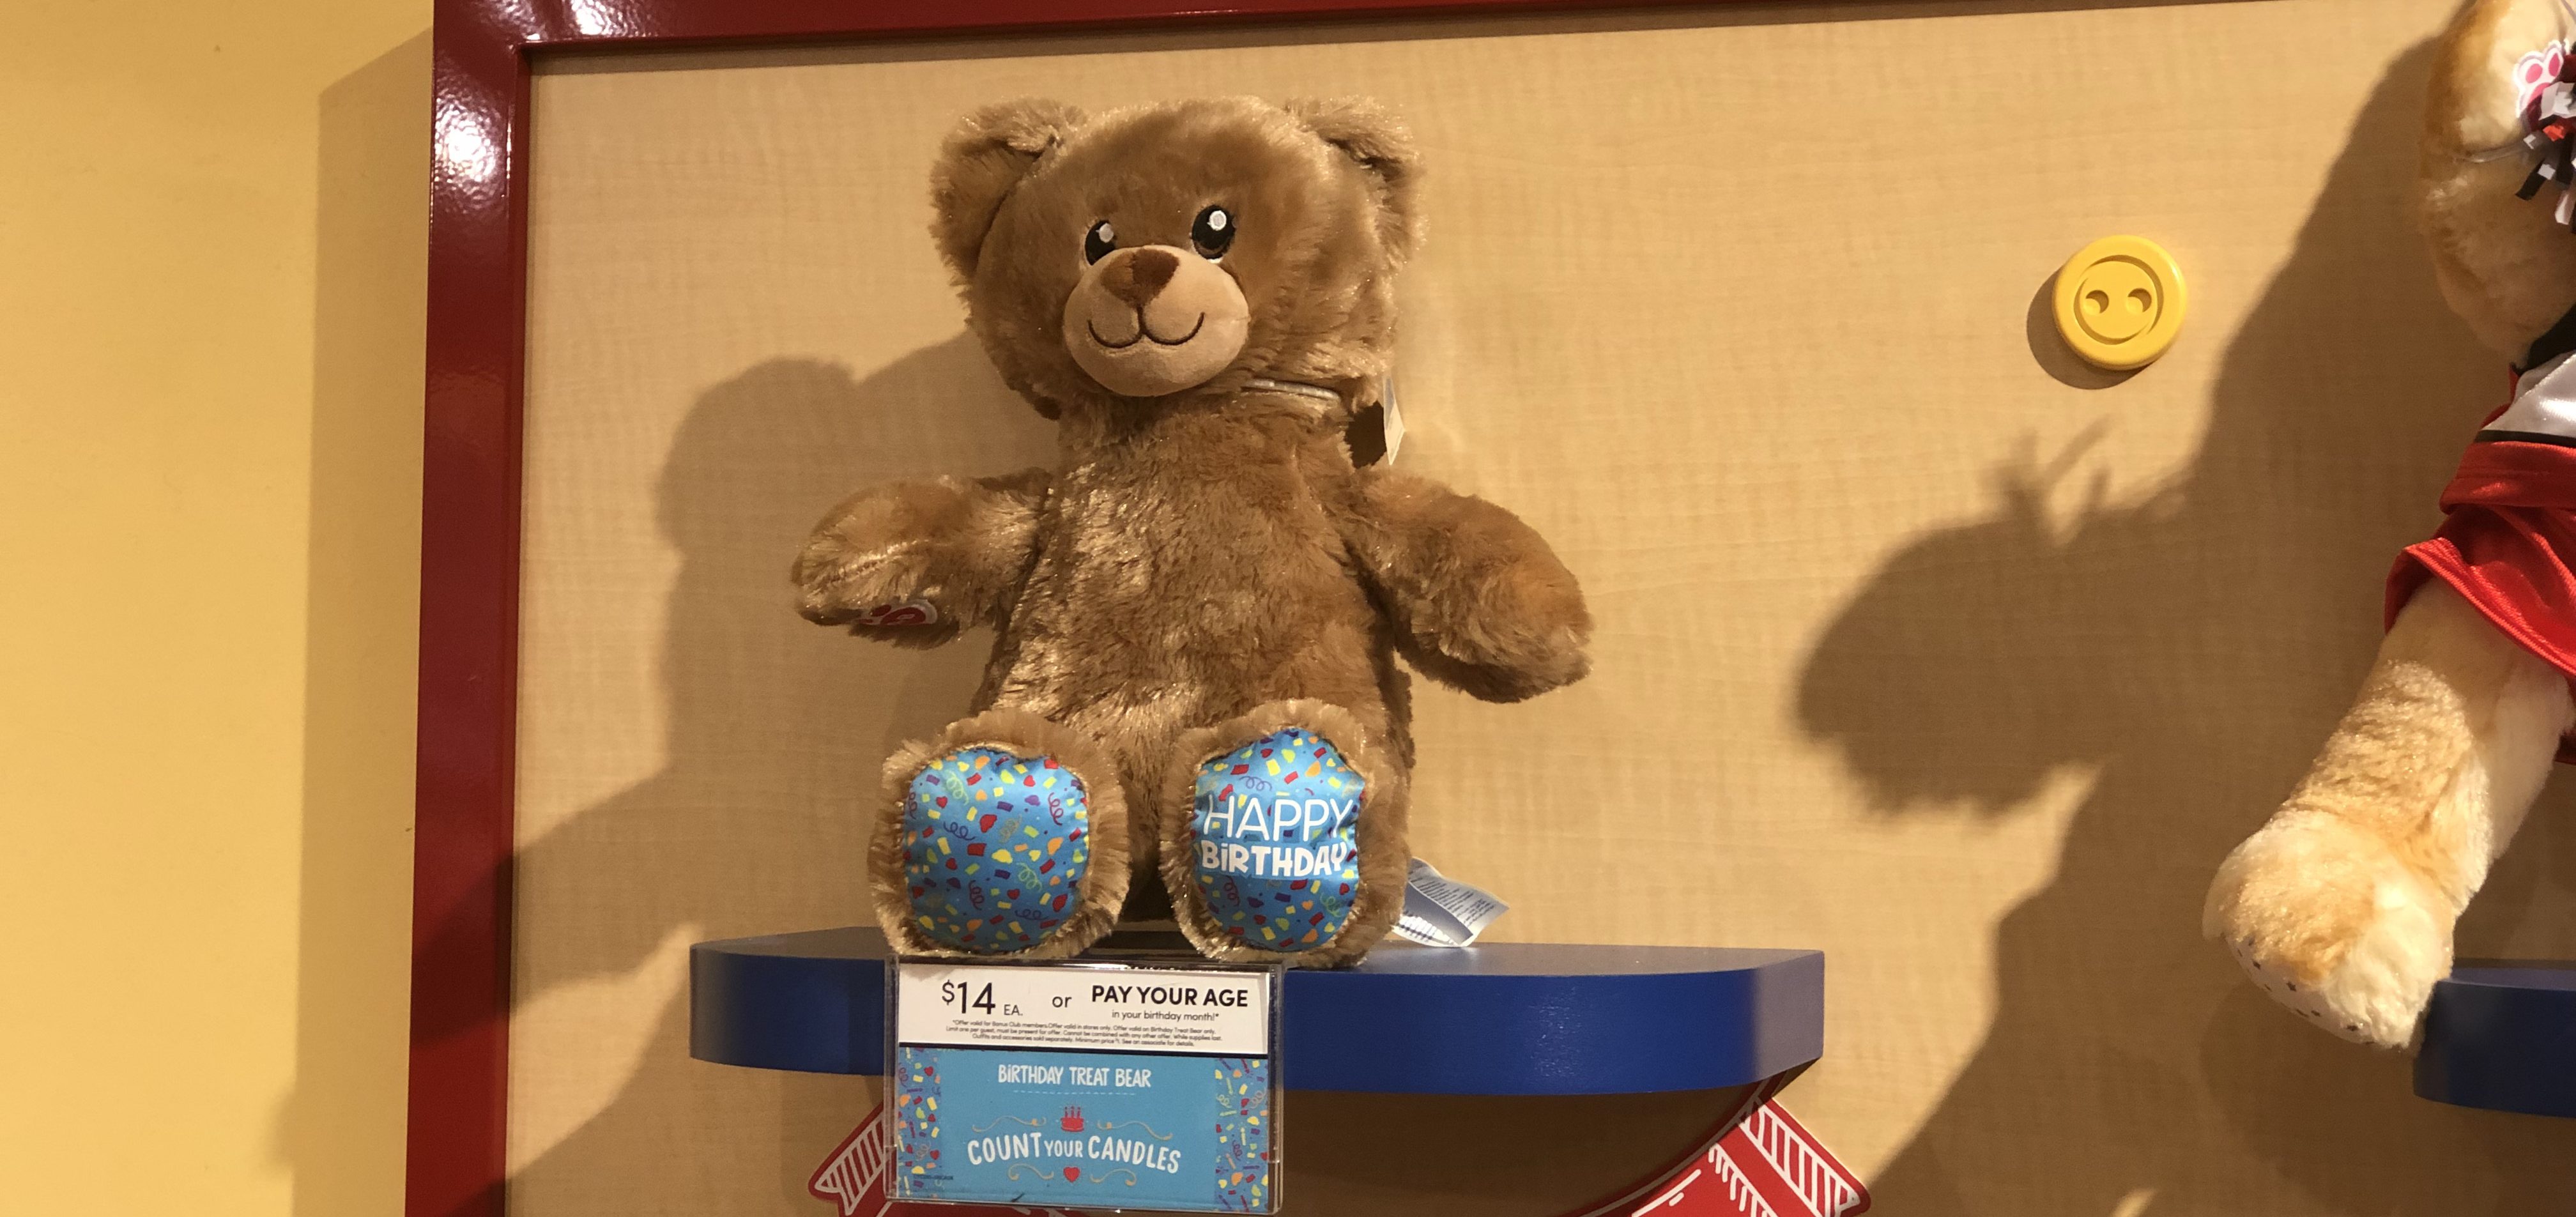 BuildABear Count Your Candles Program Pay Your Age for Birthday Bear